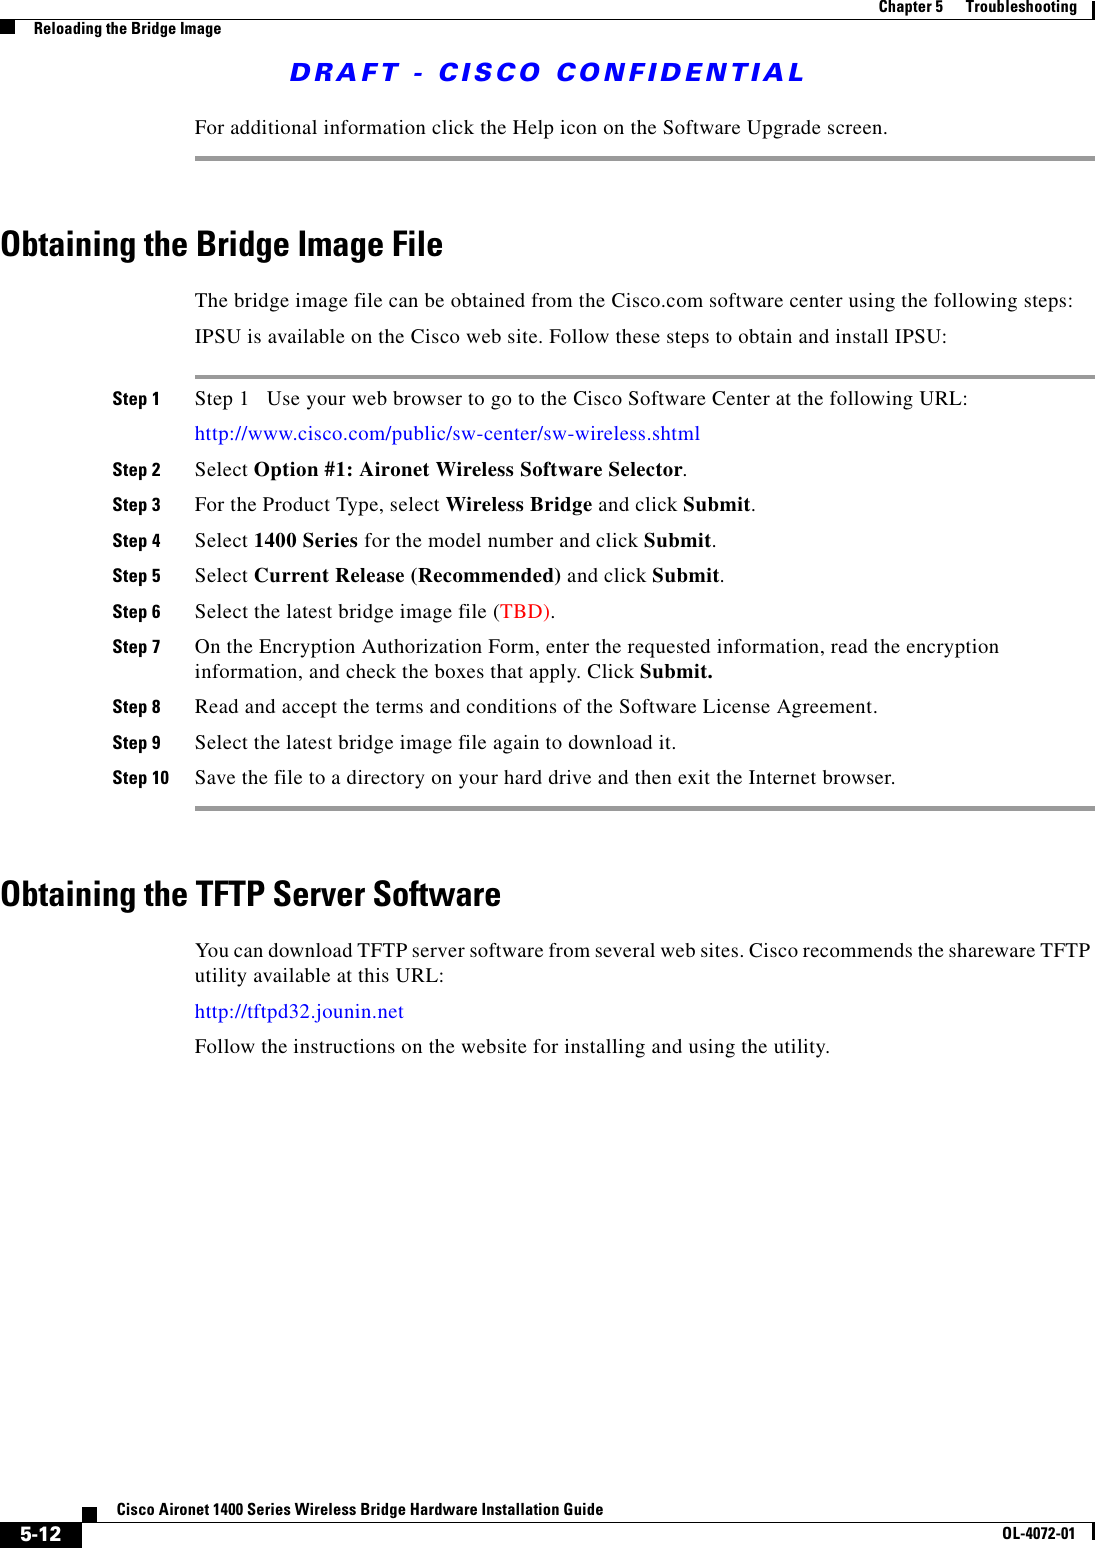 DRAFT - CISCO CONFIDENTIAL5-12Cisco Aironet 1400 Series Wireless Bridge Hardware Installation GuideOL-4072-01Chapter 5      TroubleshootingReloading the Bridge ImageFor additional information click the Help icon on the Software Upgrade screen. Obtaining the Bridge Image FileThe bridge image file can be obtained from the Cisco.com software center using the following steps:IPSU is available on the Cisco web site. Follow these steps to obtain and install IPSU:Step 1 Step 1   Use your web browser to go to the Cisco Software Center at the following URL:http://www.cisco.com/public/sw-center/sw-wireless.shtml Step 2 Select Option #1: Aironet Wireless Software Selector.Step 3 For the Product Type, select Wireless Bridge and click Submit.Step 4 Select 1400 Series for the model number and click Submit.Step 5 Select Current Release (Recommended) and click Submit.Step 6 Select the latest bridge image file (TBD).Step 7 On the Encryption Authorization Form, enter the requested information, read the encryption information, and check the boxes that apply. Click Submit.Step 8 Read and accept the terms and conditions of the Software License Agreement. Step 9 Select the latest bridge image file again to download it.Step 10 Save the file to a directory on your hard drive and then exit the Internet browser. Obtaining the TFTP Server SoftwareYou can download TFTP server software from several web sites. Cisco recommends the shareware TFTP utility available at this URL:http://tftpd32.jounin.netFollow the instructions on the website for installing and using the utility.